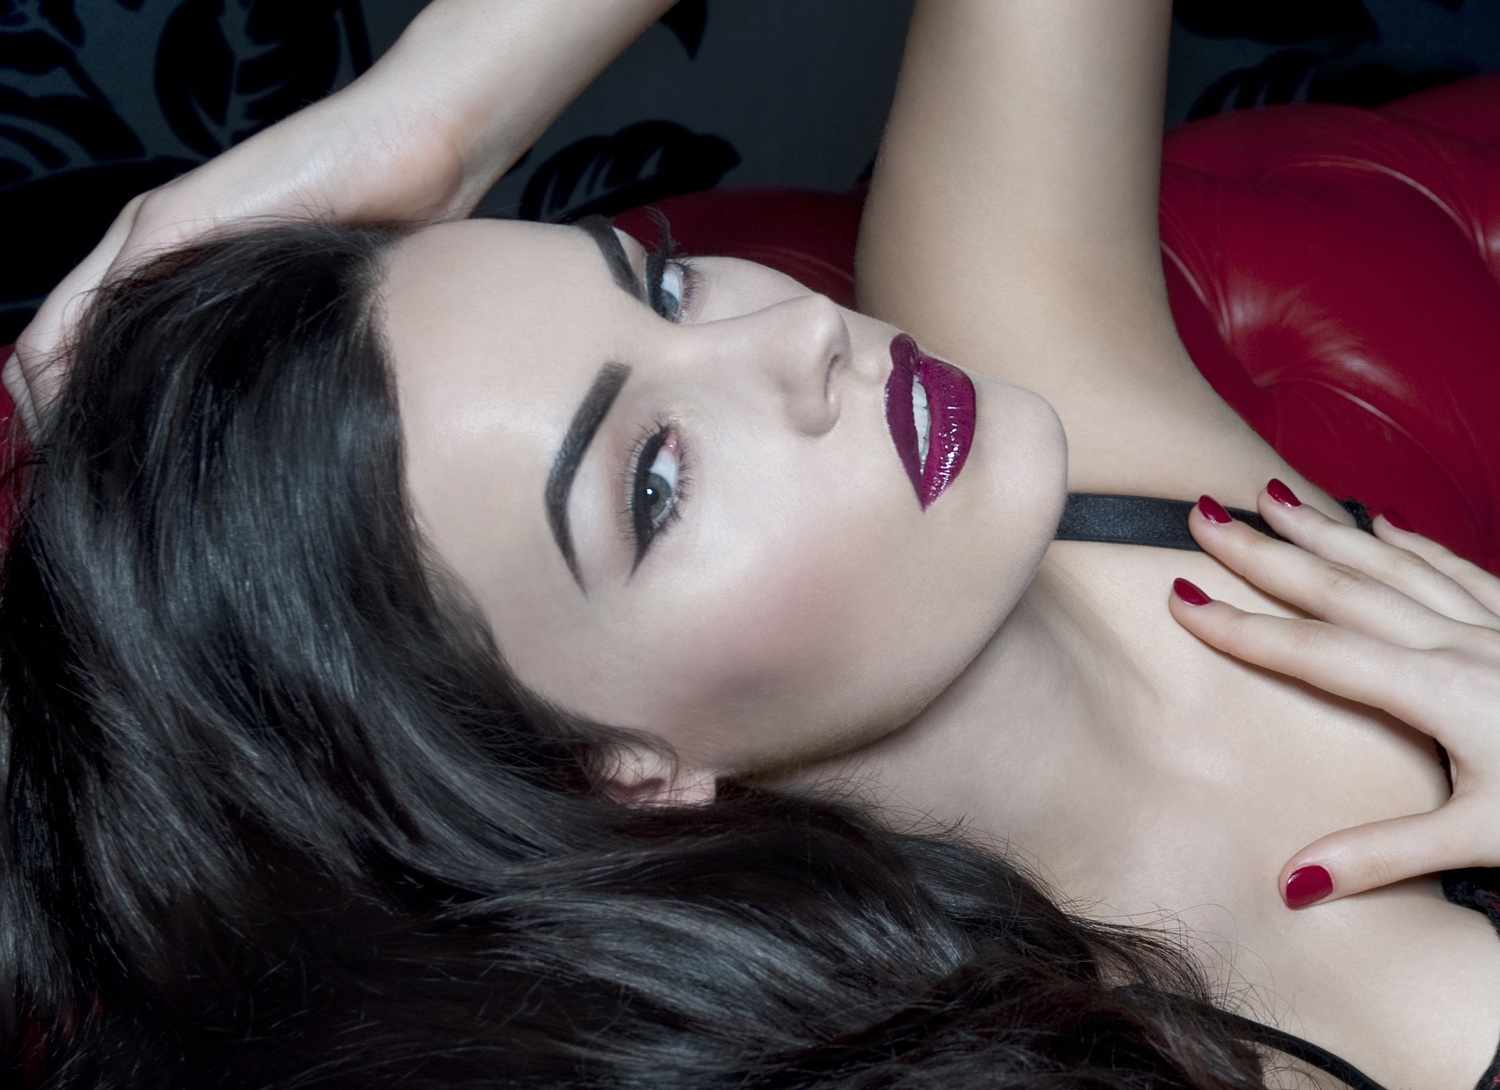 A woman with dark hair and purple lipstick.